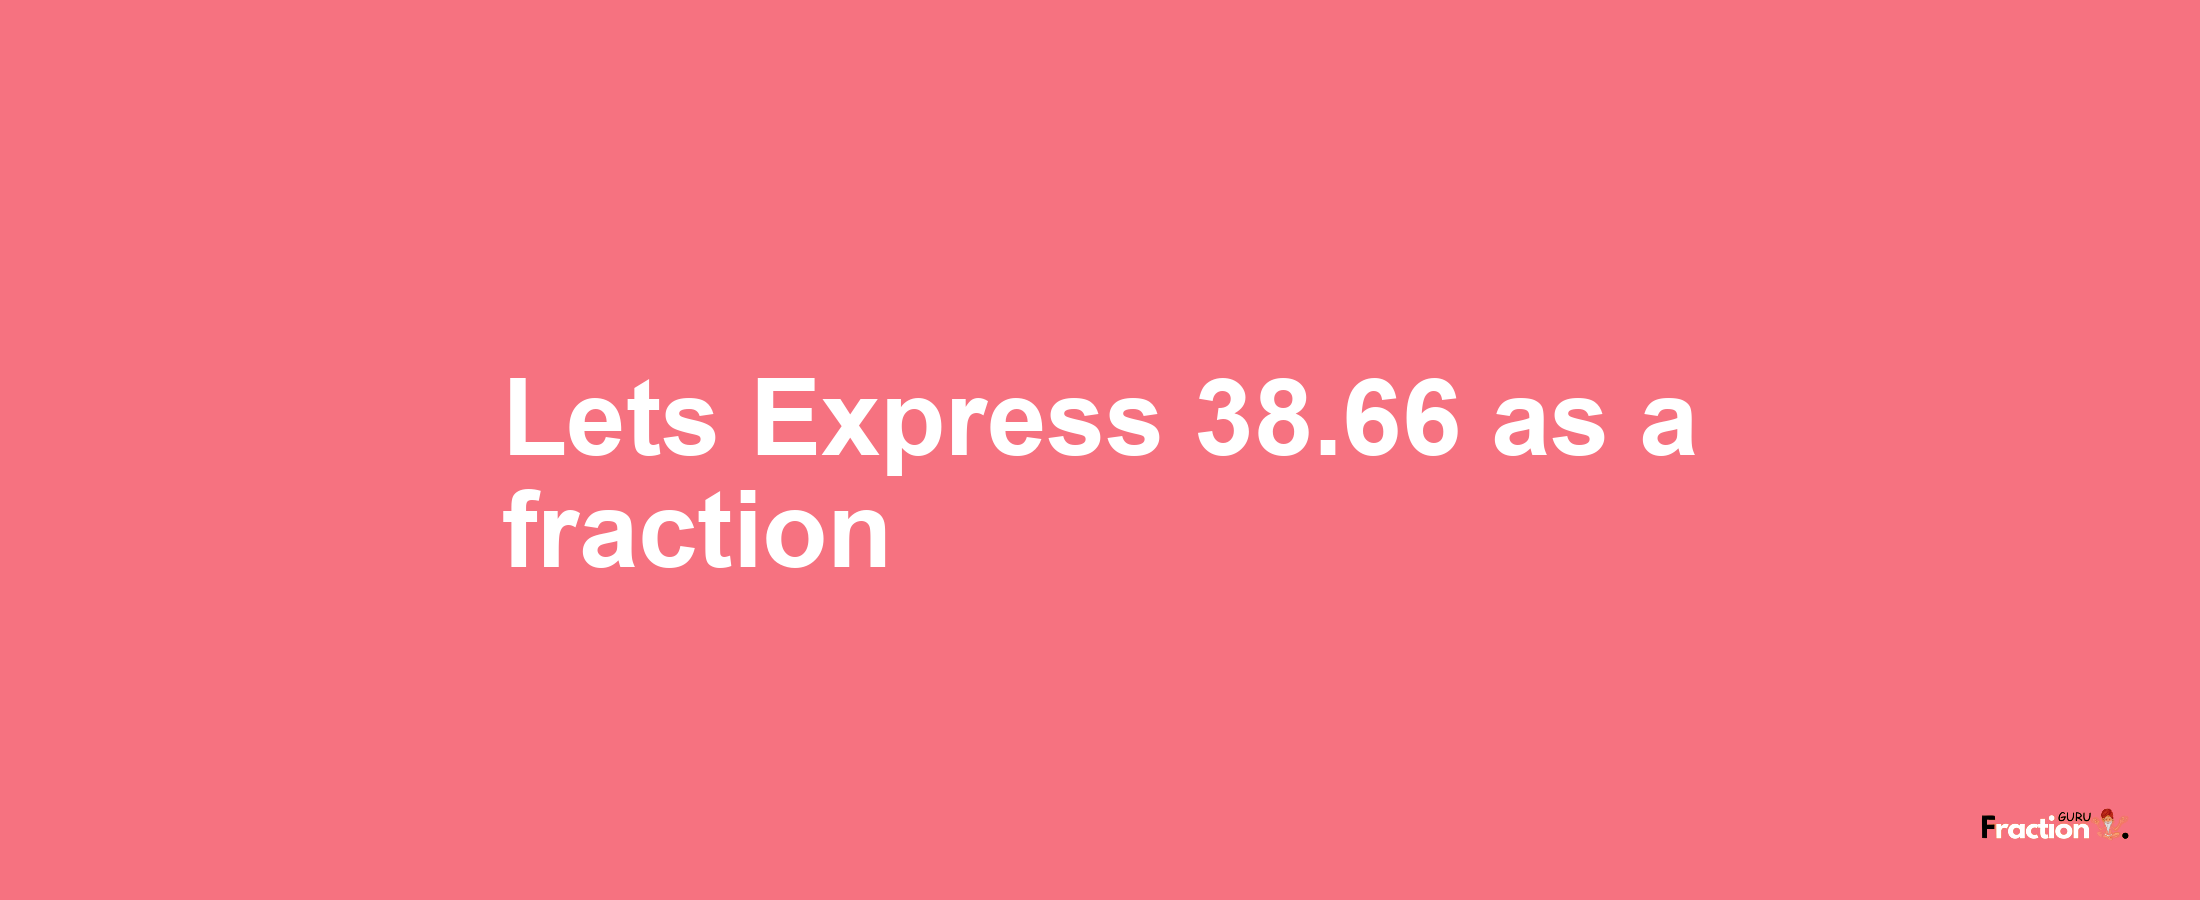 Lets Express 38.66 as afraction